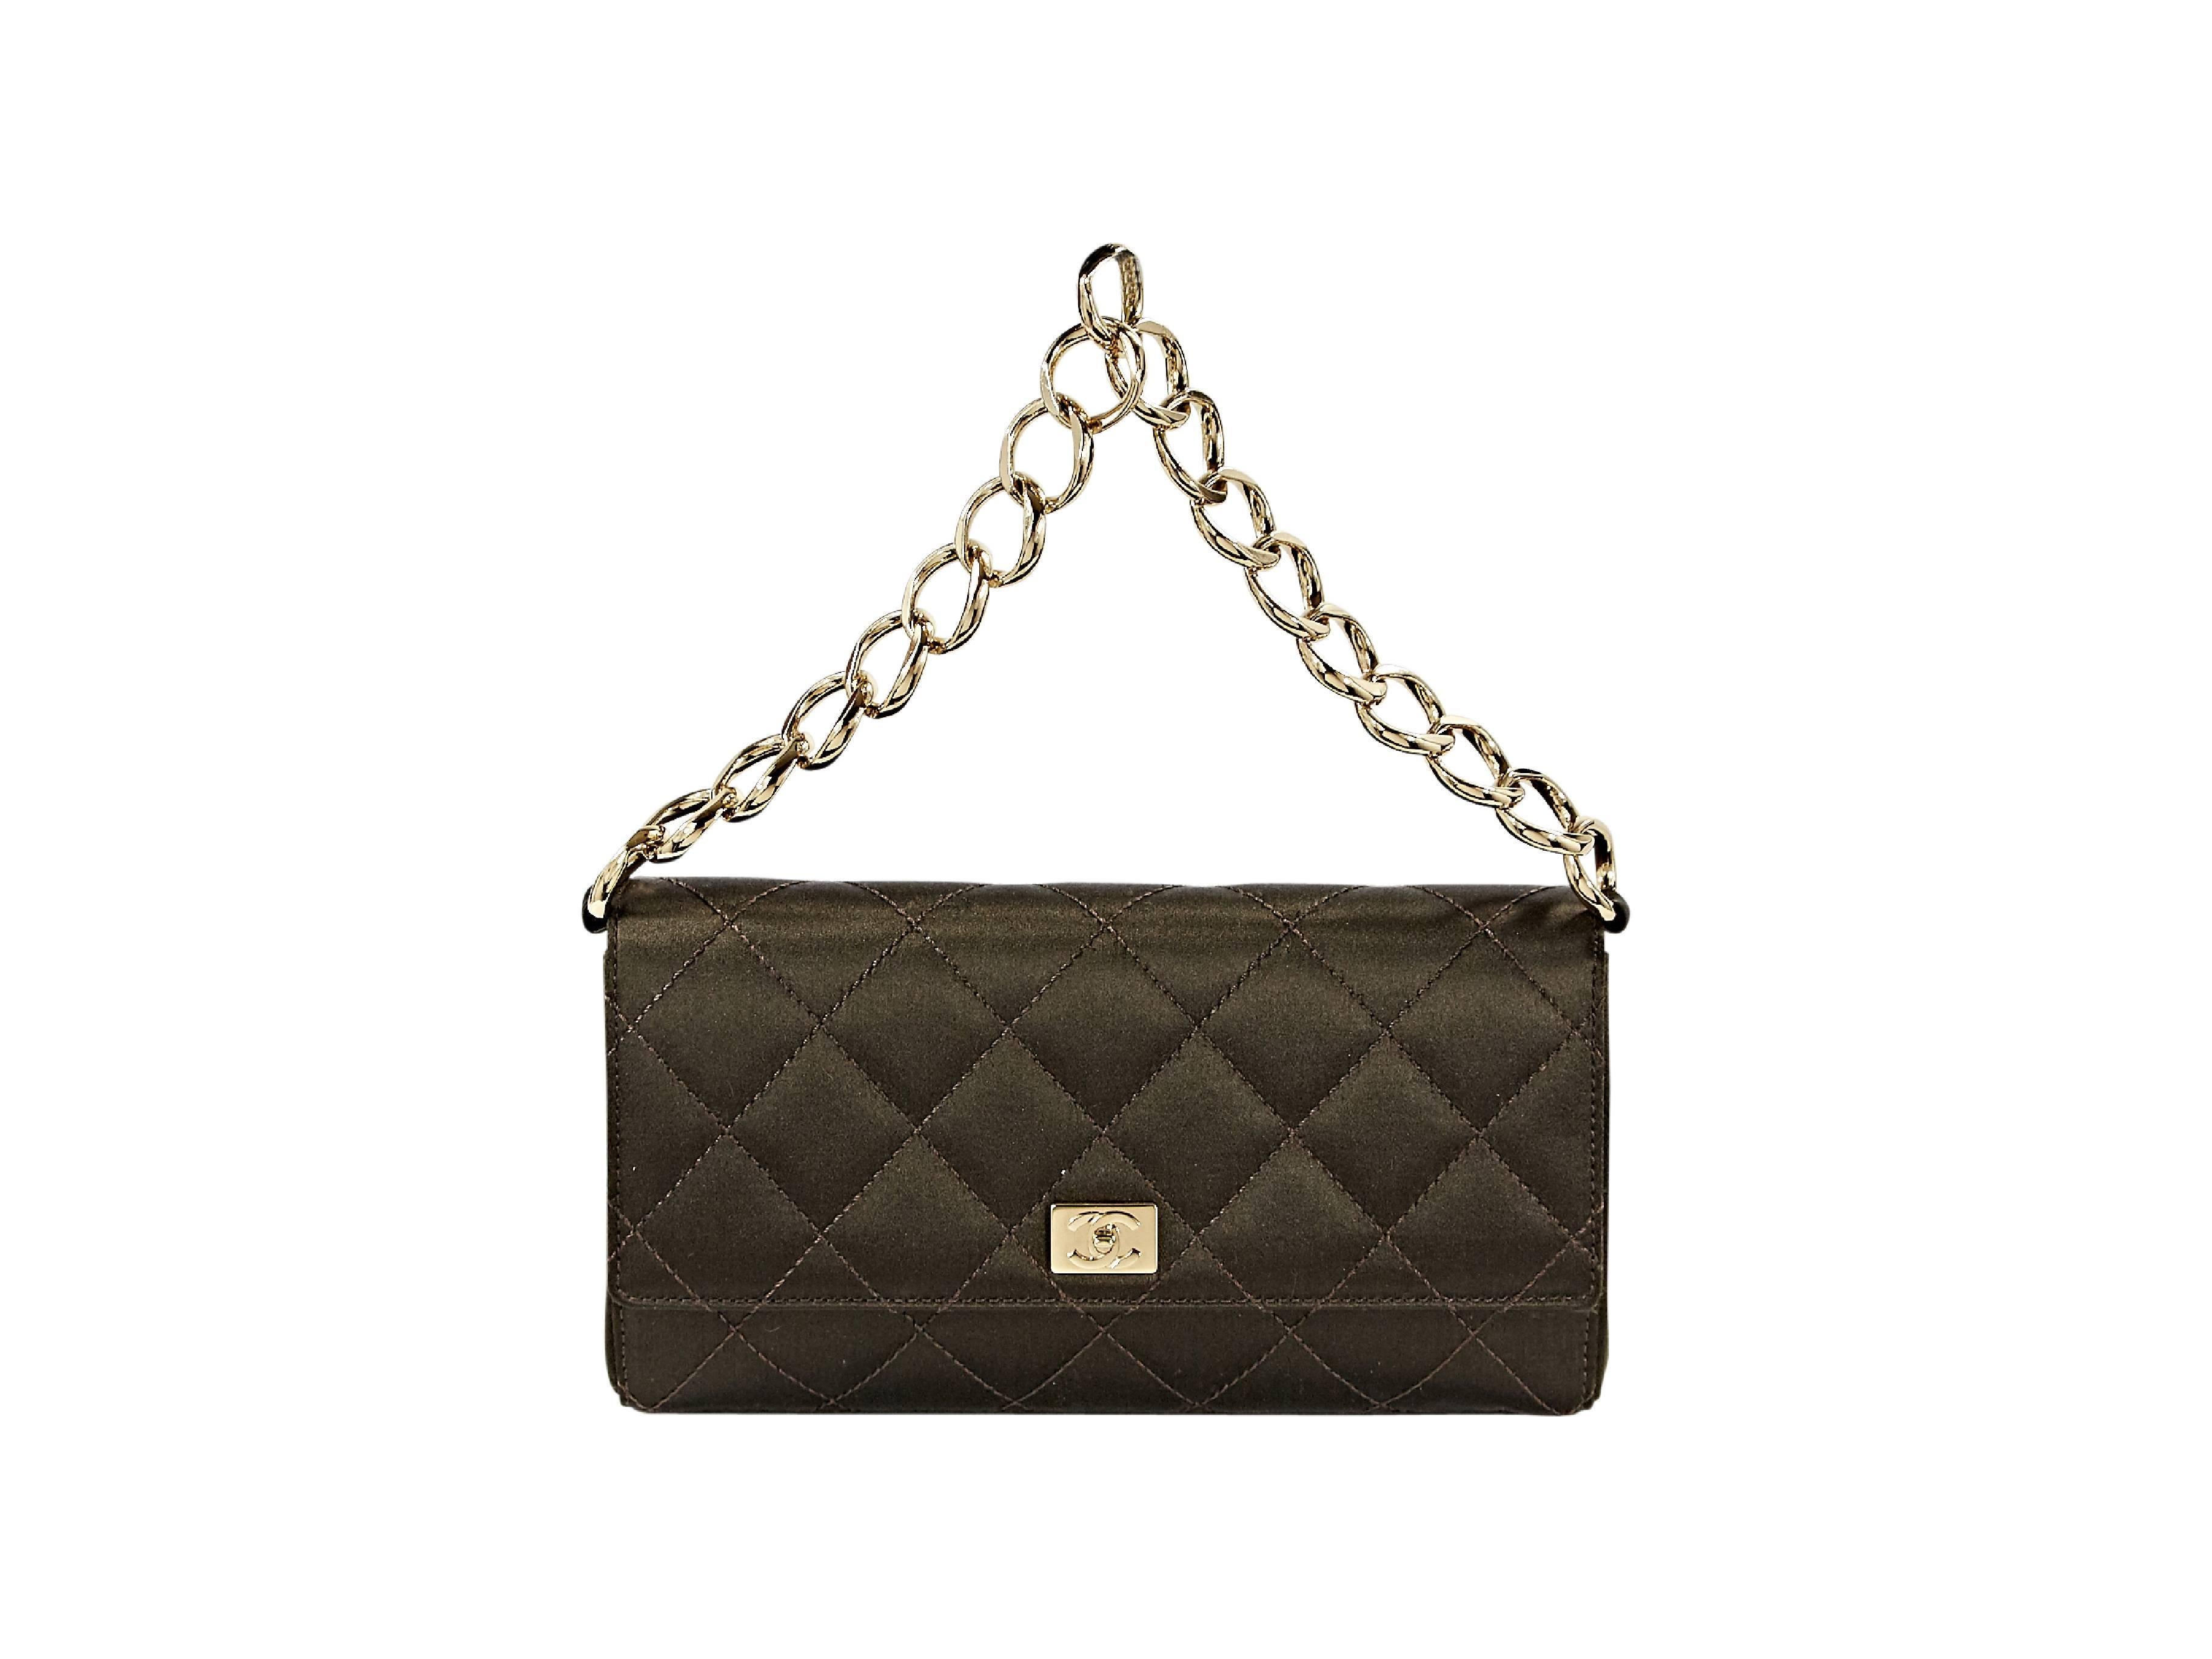 Brown quilted satin shoulder bag by Chanel.  Goldtone chain shoulder strap.  Front flap with twist-lock closure. 